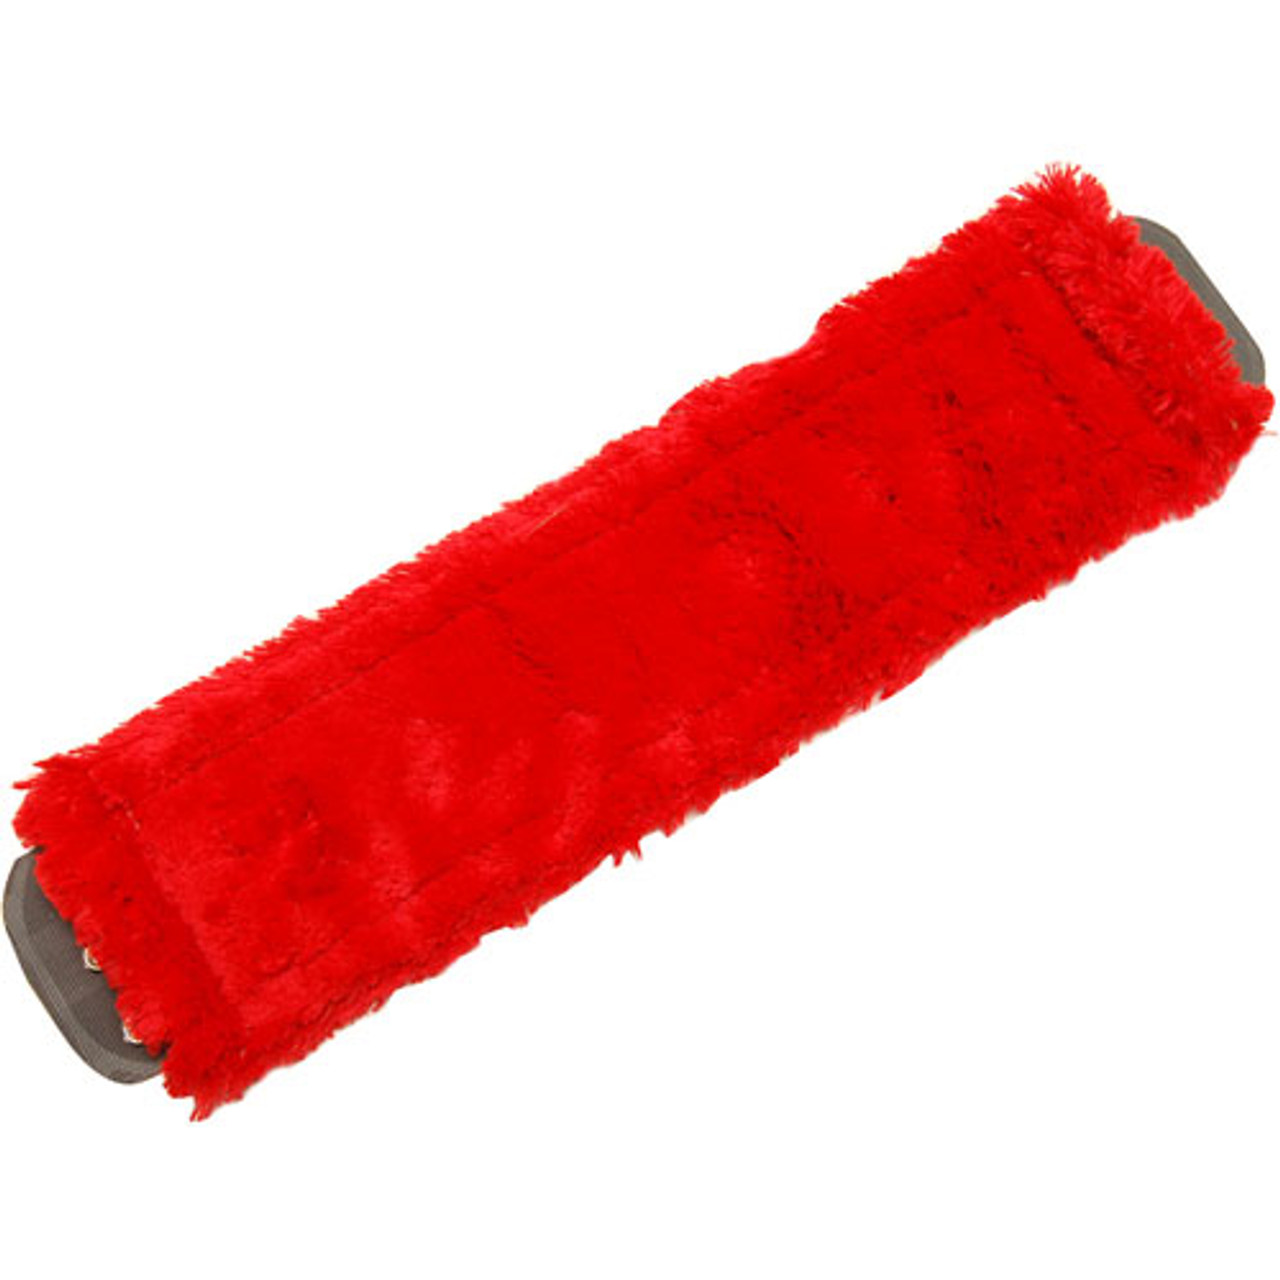 Mop Head,Micro Fiber , Hd,Red - Replacement Part For Unger Enterprises Inc USA MM40R